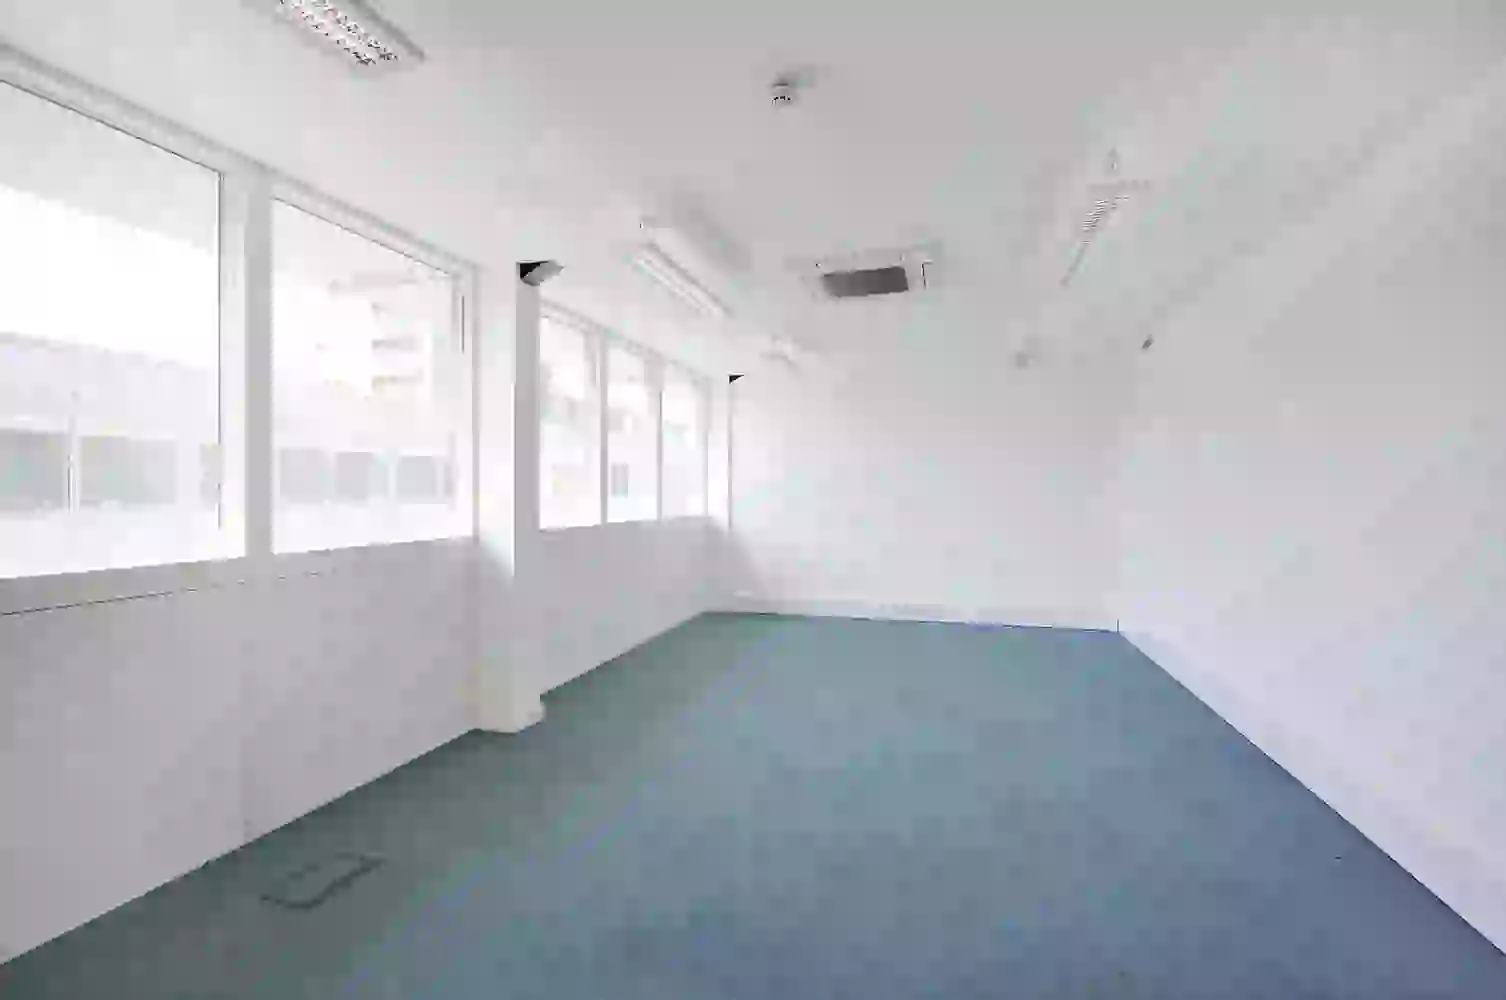 Office space to rent at Q West, Great West Road, Brentford, London, unit IH.3.08, 354 sq ft (32 sq m).